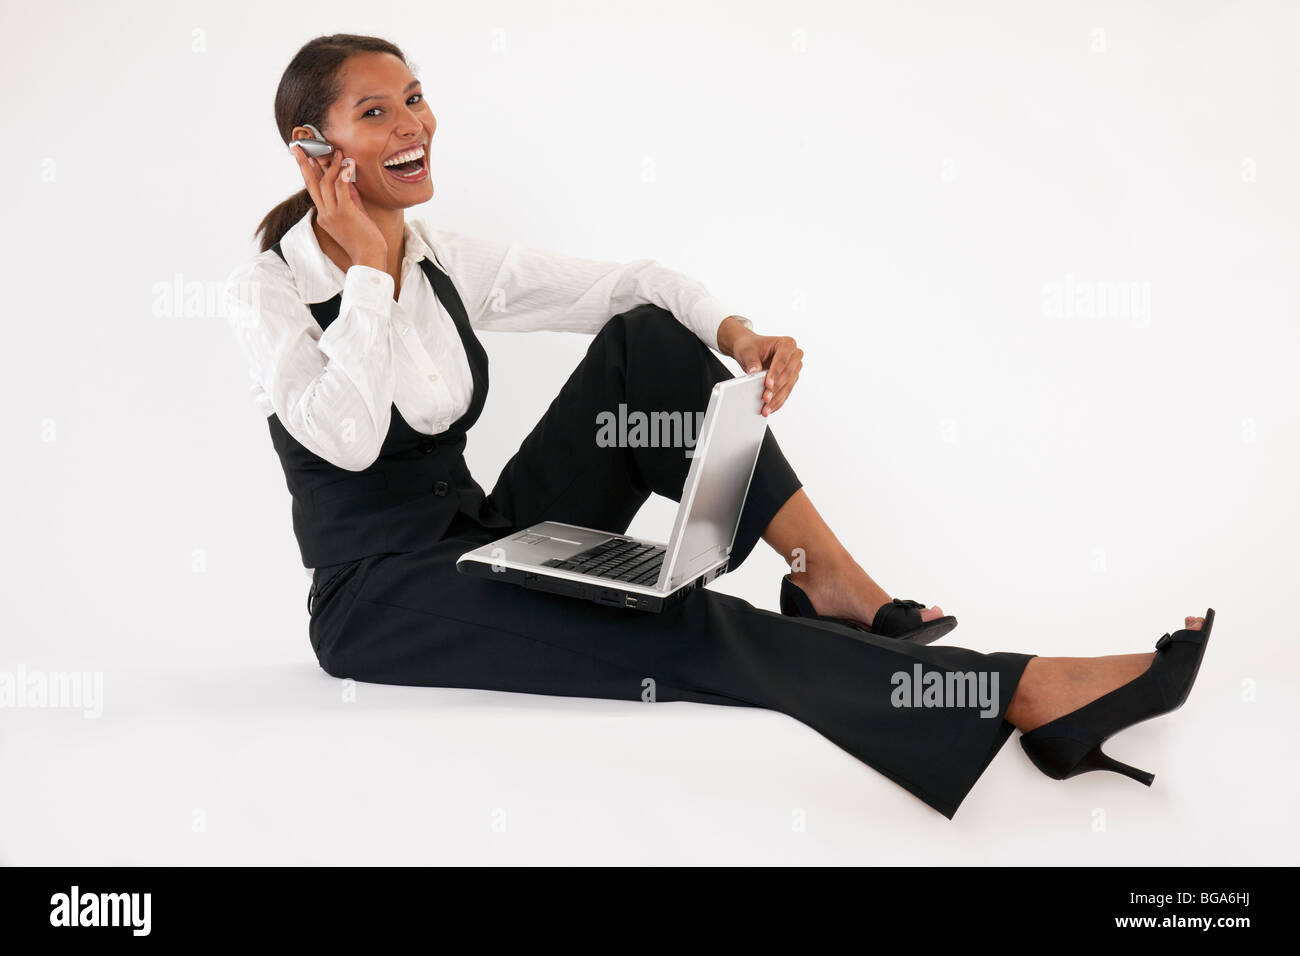 Young woman sitting on floor using laptop and wearing bluetooth headset. Horizontally format. Stock Photo